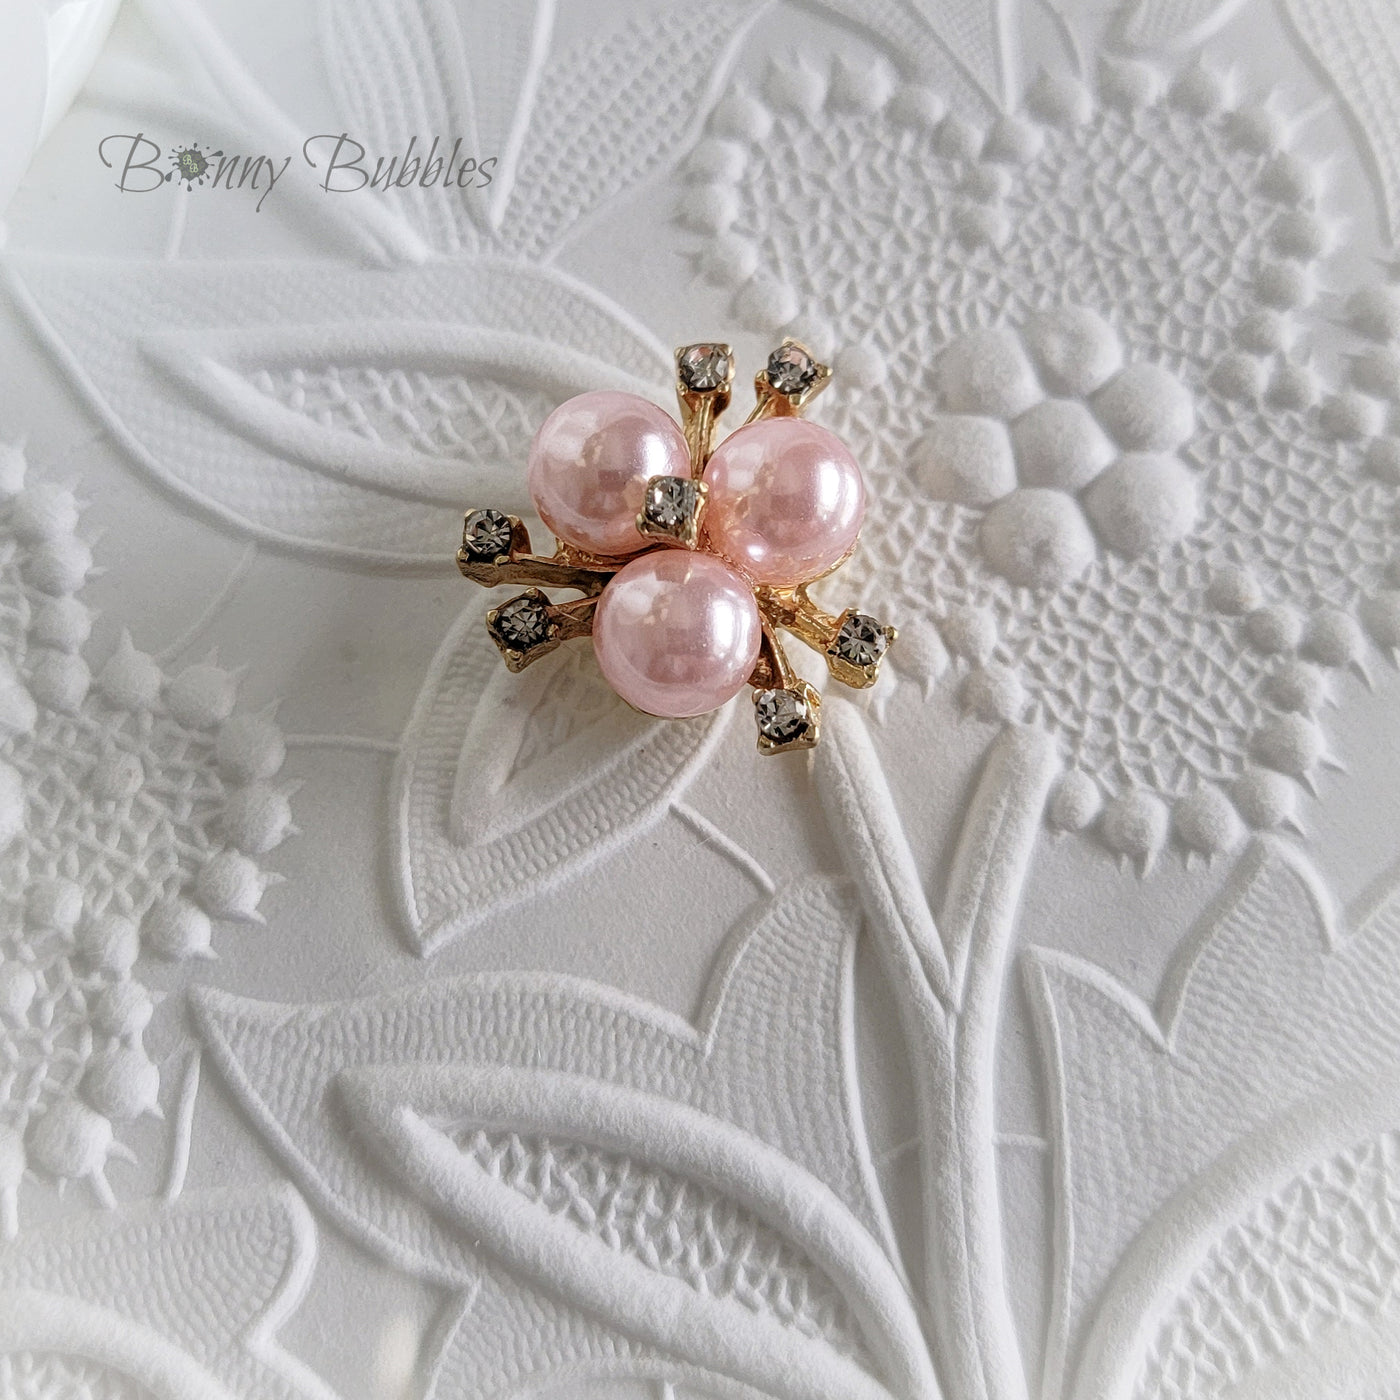 Lovely Vintage Floral Pearl Brooch with Rhinestone Accents